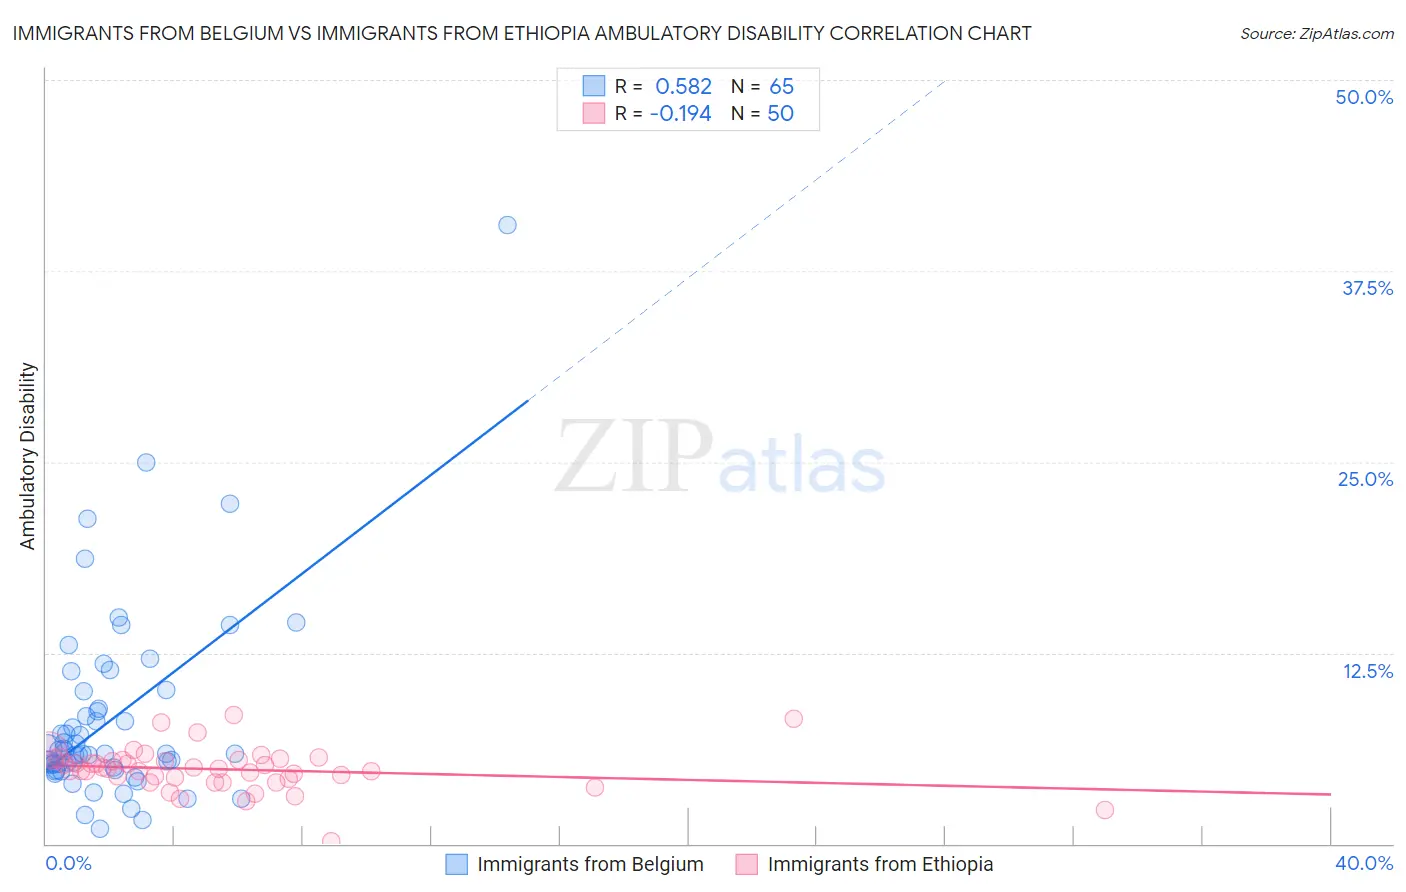 Immigrants from Belgium vs Immigrants from Ethiopia Ambulatory Disability